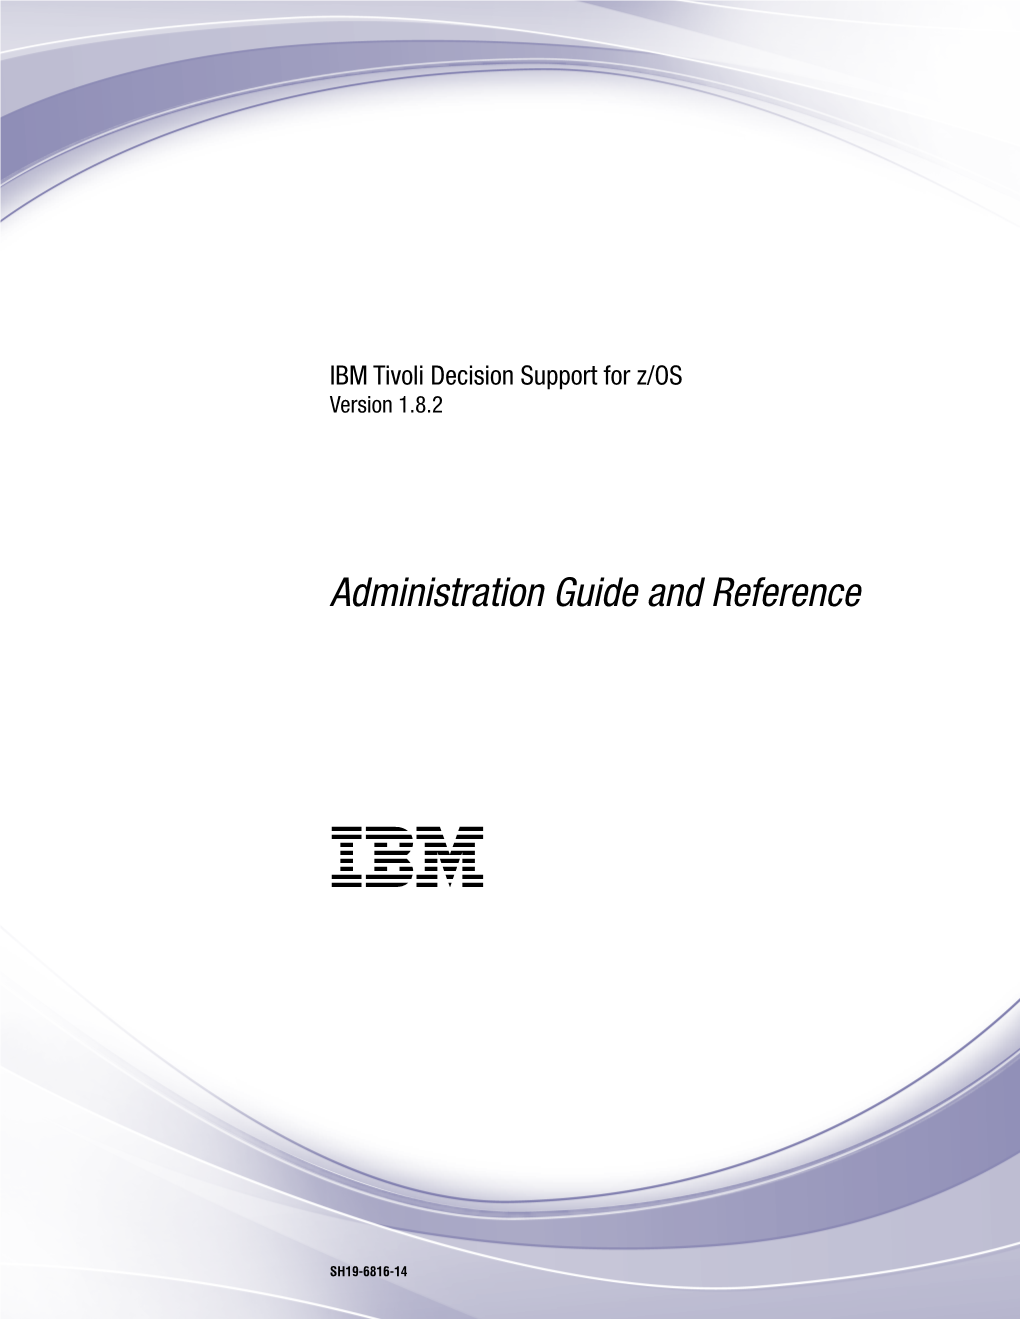 IBM Tivoli Decision Support for Z/OS: Administration Guide and Reference Displaying and Editing the Purge Condition of a Part 4